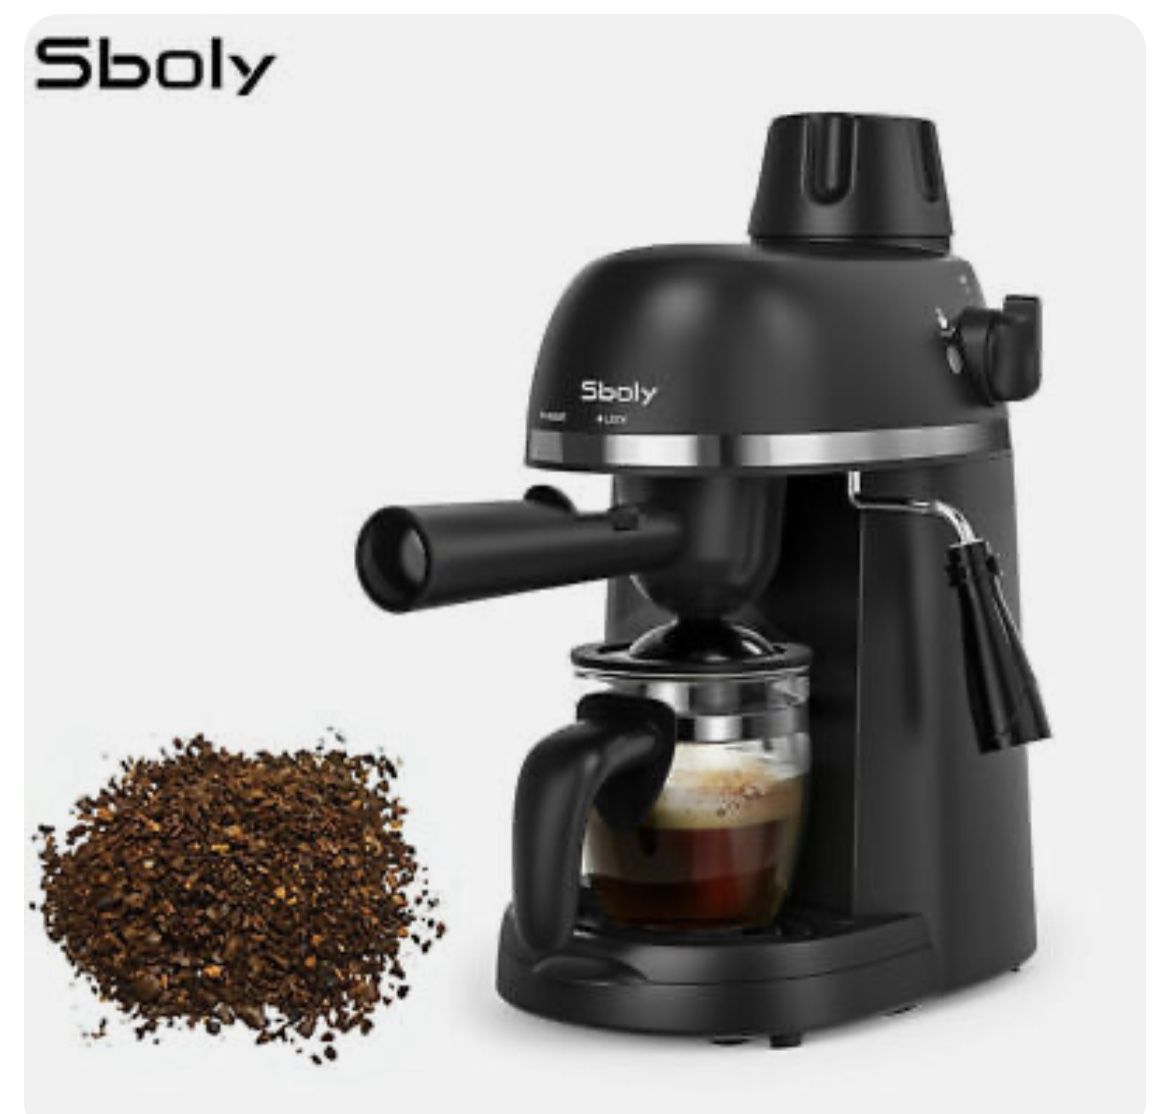 Steam Espresso Machine with Milk Frother 1-4 Cup Expresso Coffee Maker Cappuccino Latte Machine Includes Carafe Sboly